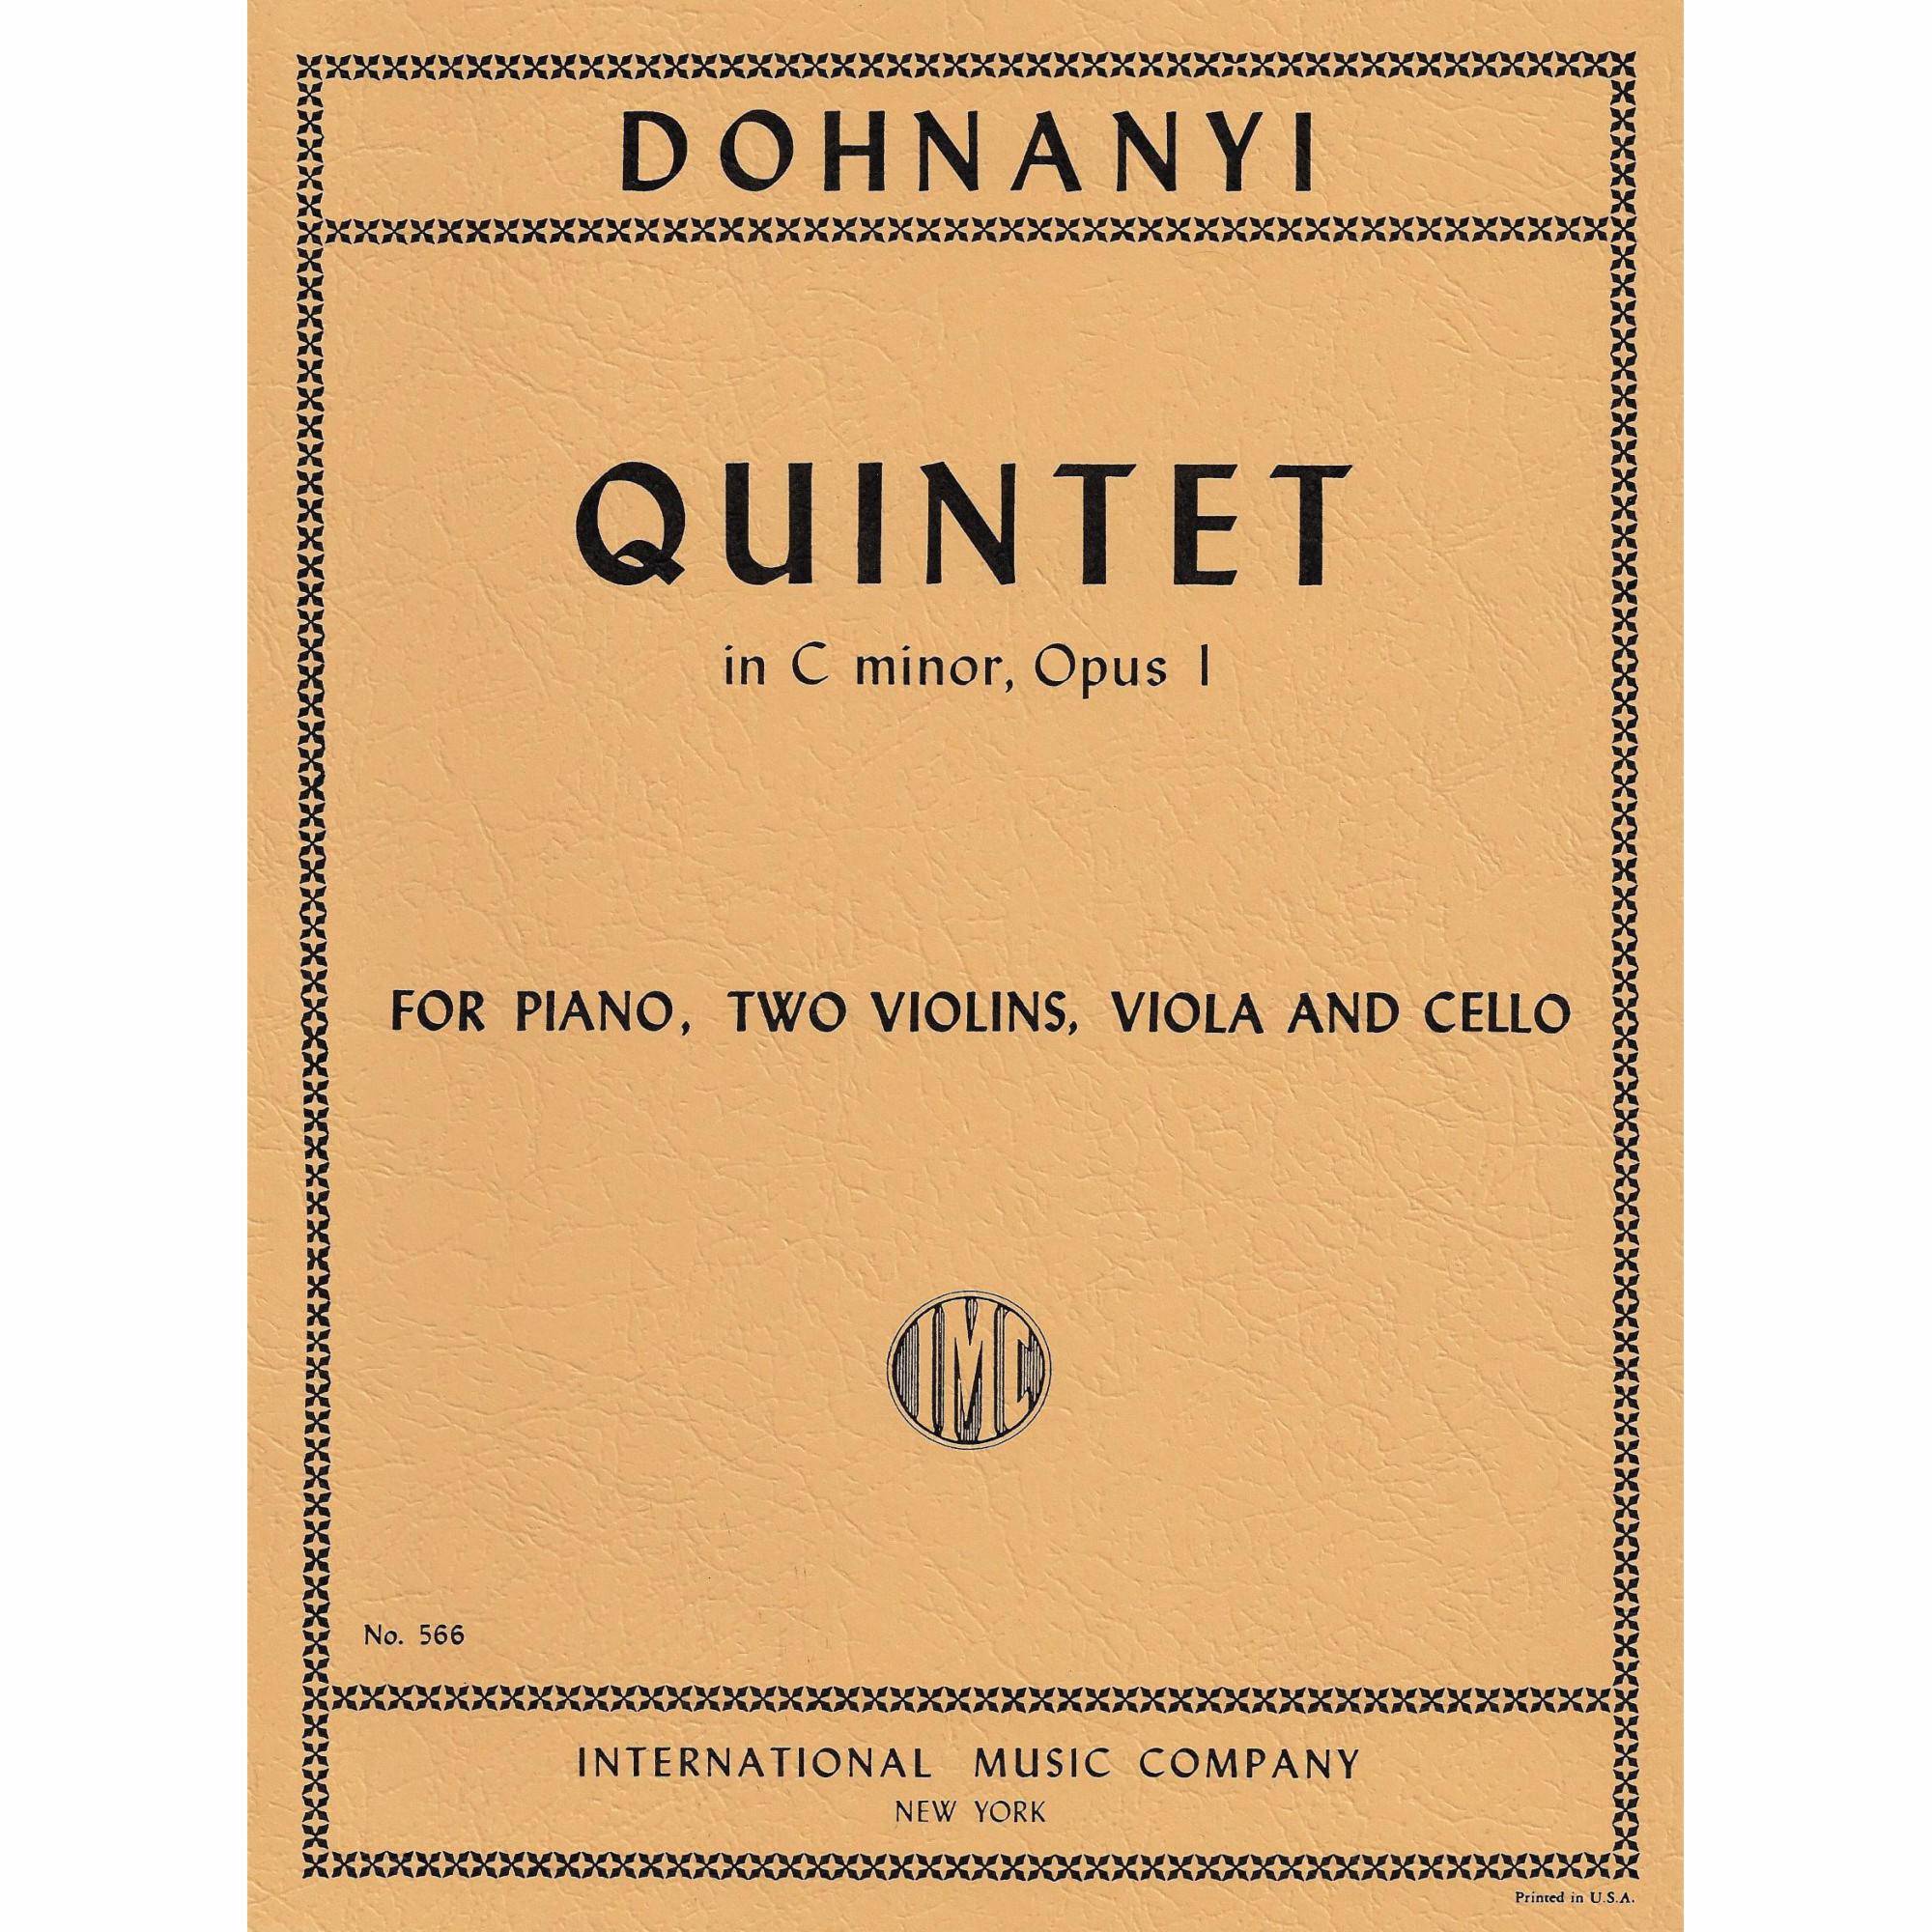 Dohnanyi -- Piano Quintet in C Minor, Op. 1 | Southwest Strings